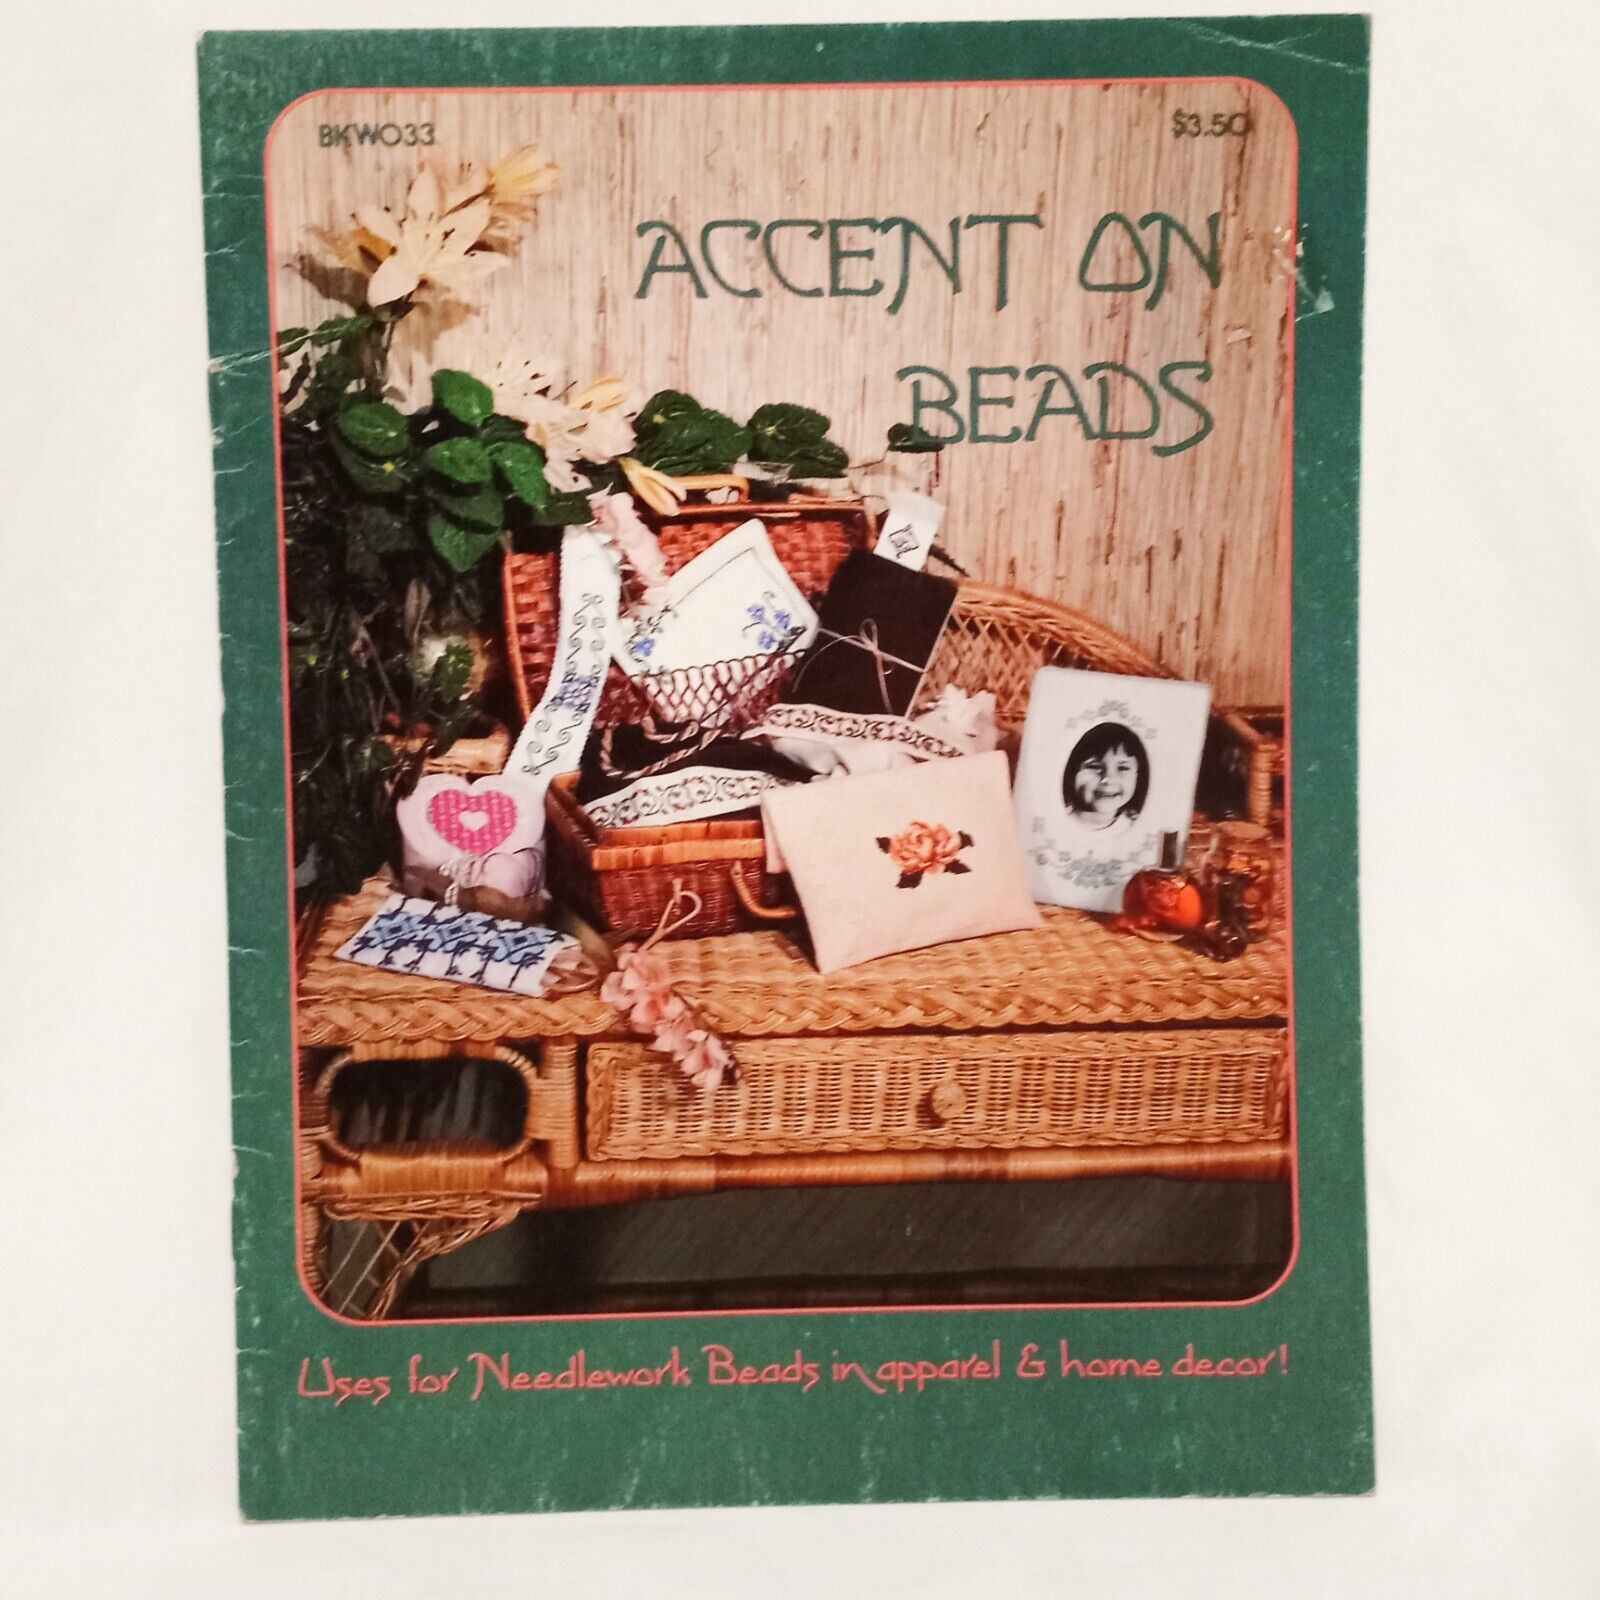 Accent on Beads Cross Stitch Needlework BKW033 Kristy Armstrong Patterns 1984 - $15.83